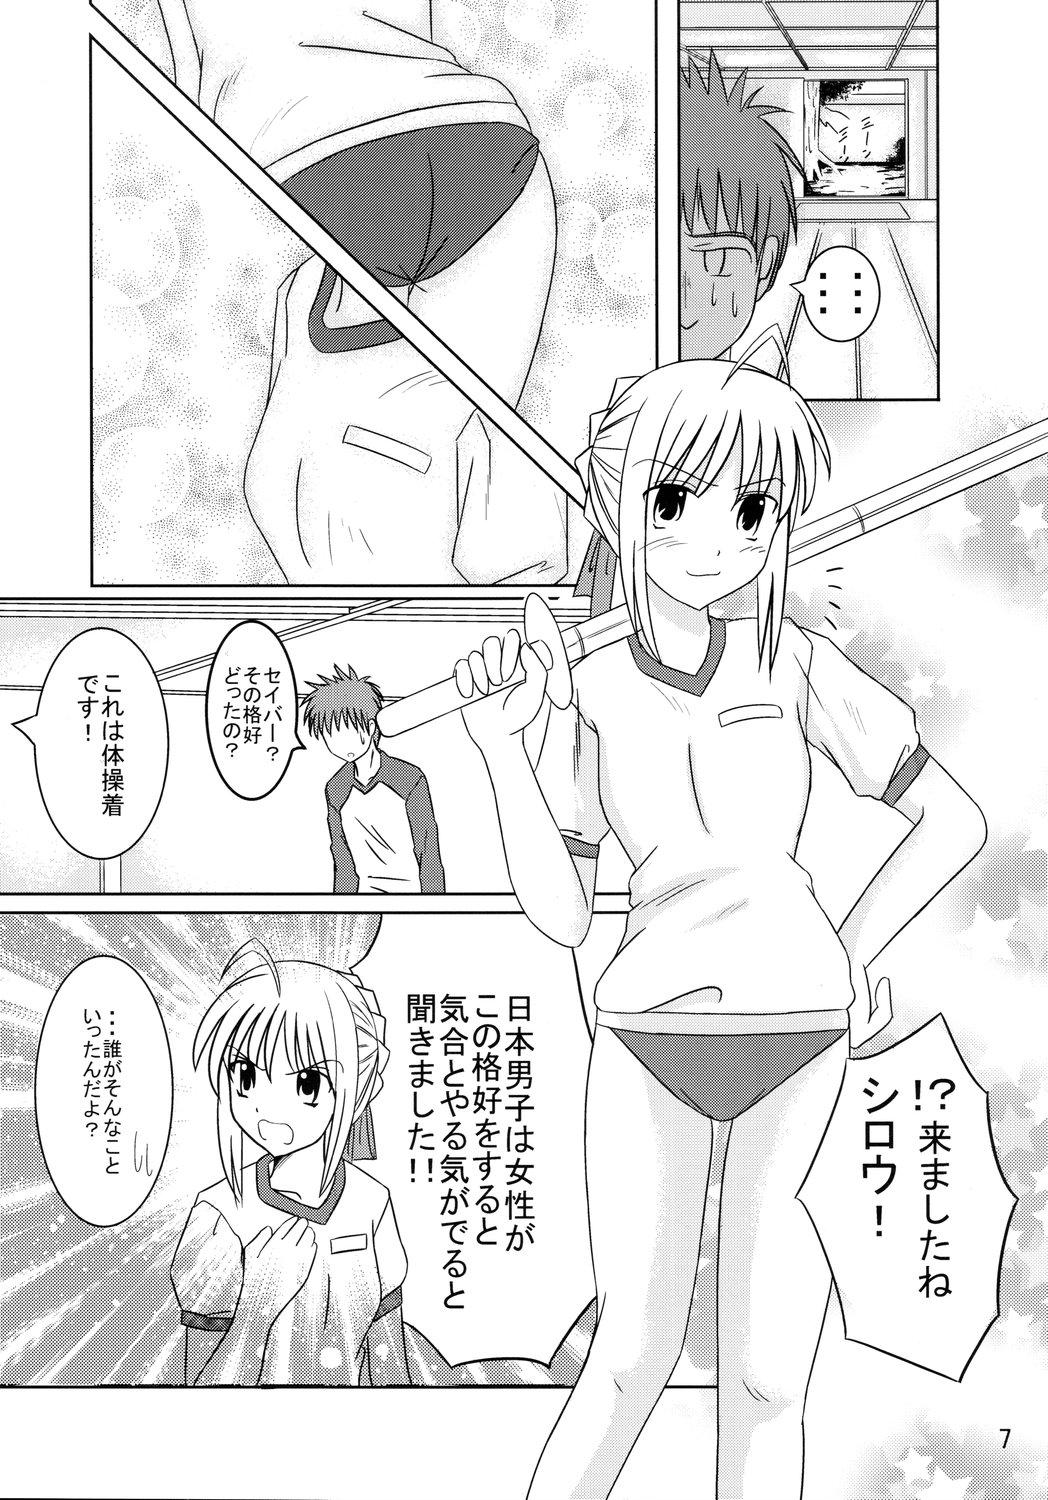 Cream Pie Saber Of Sanity - Fate stay night Lesbians - Page 6